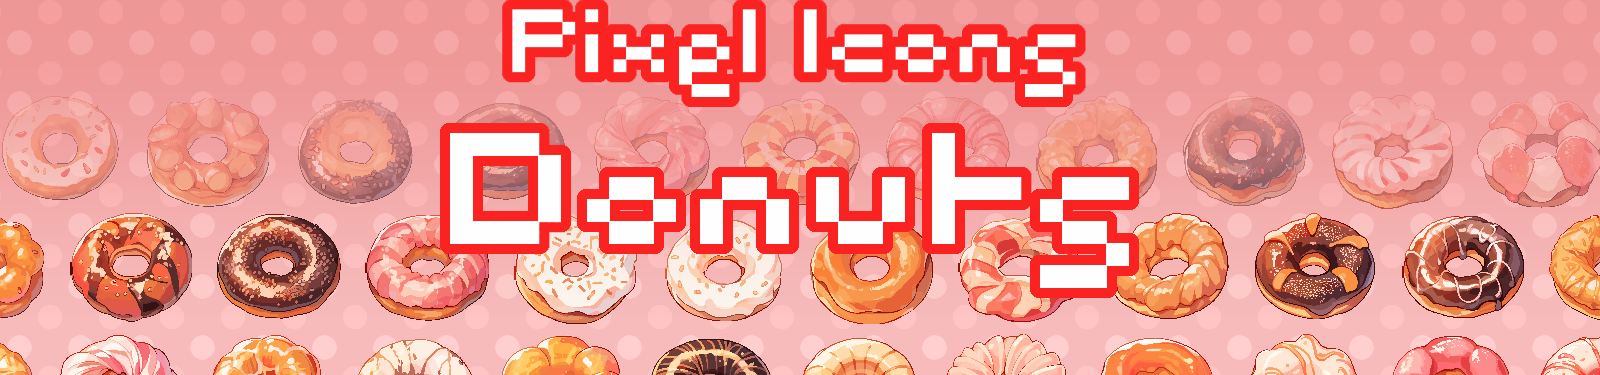 Pixel Icons: Donuts